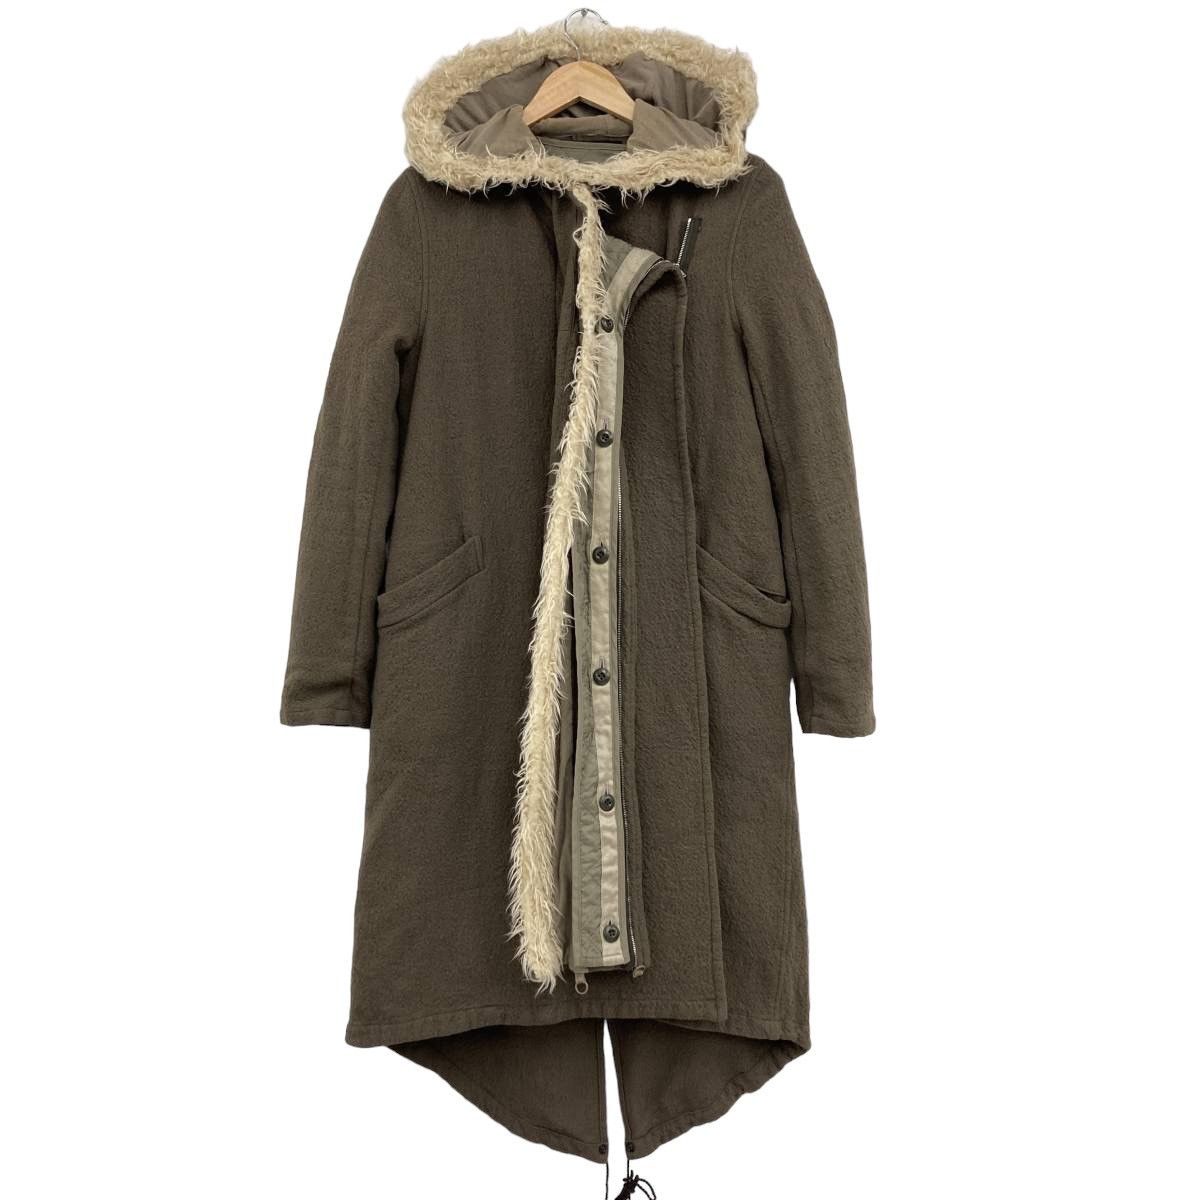 undercover 06aw but beautiful Mods coat-